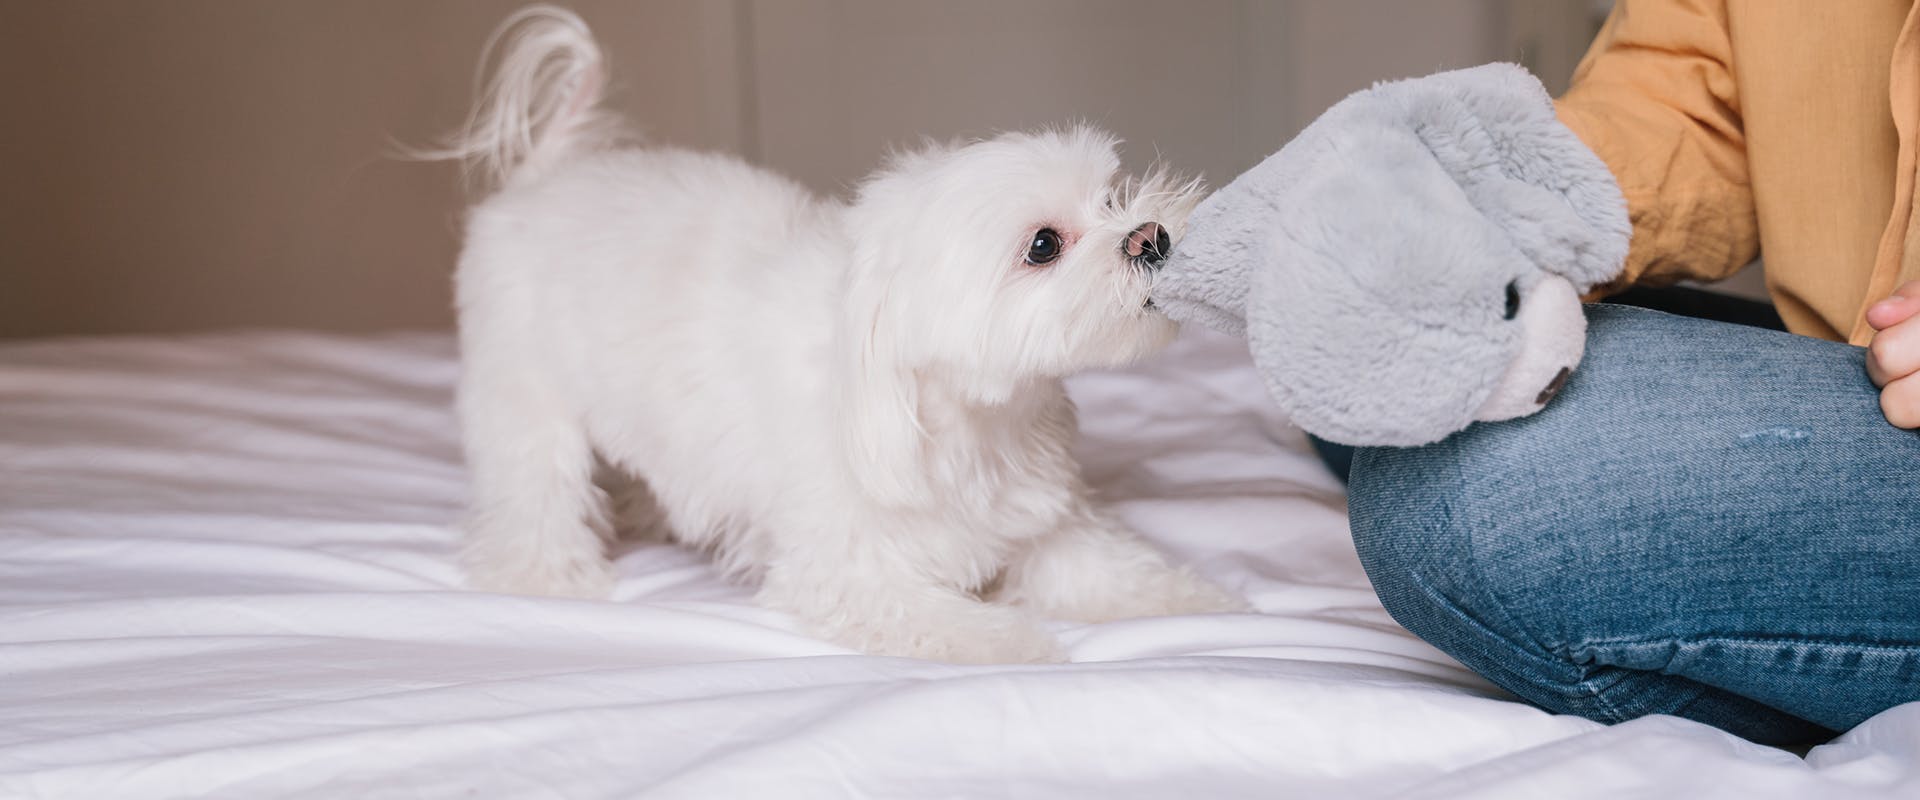 A cute, playful Maltese dog and a woman's hand playing tug-of-war with a grey teddy bear